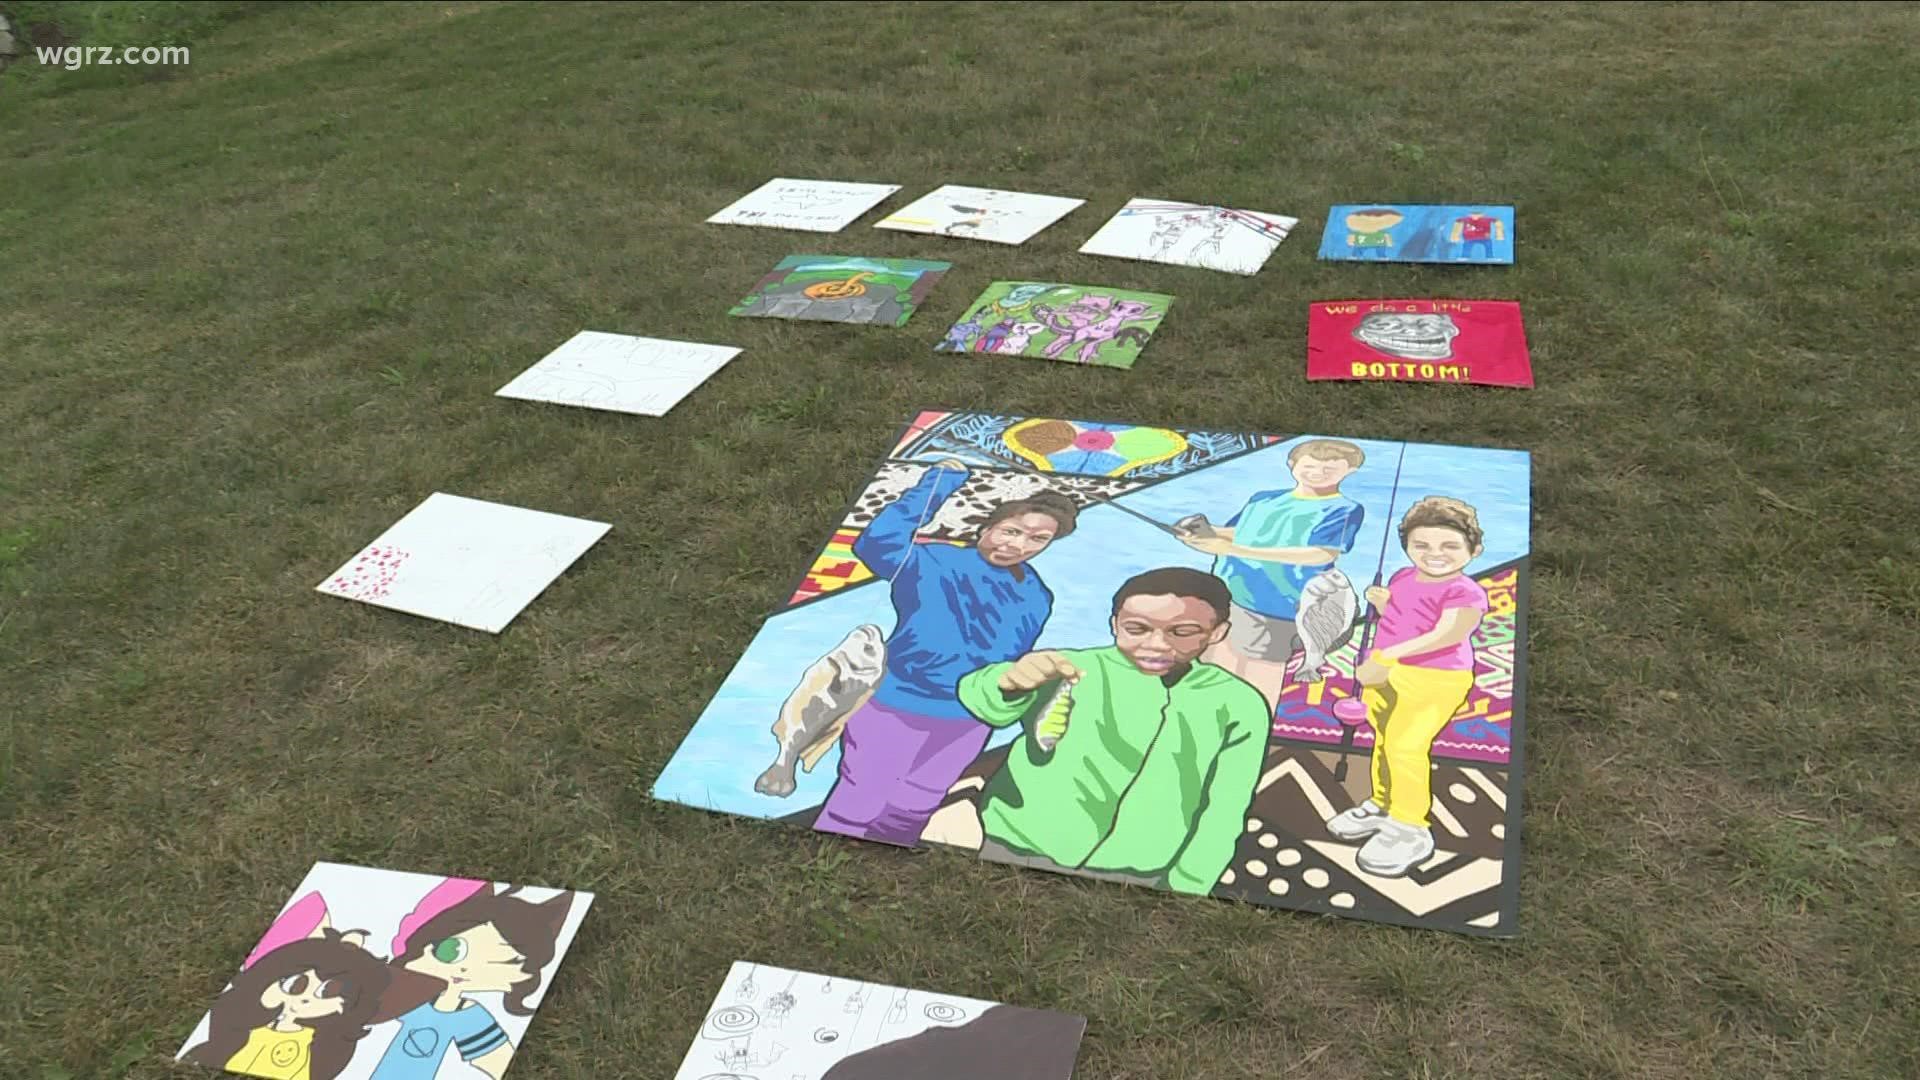 A New Mural For Broderick Park